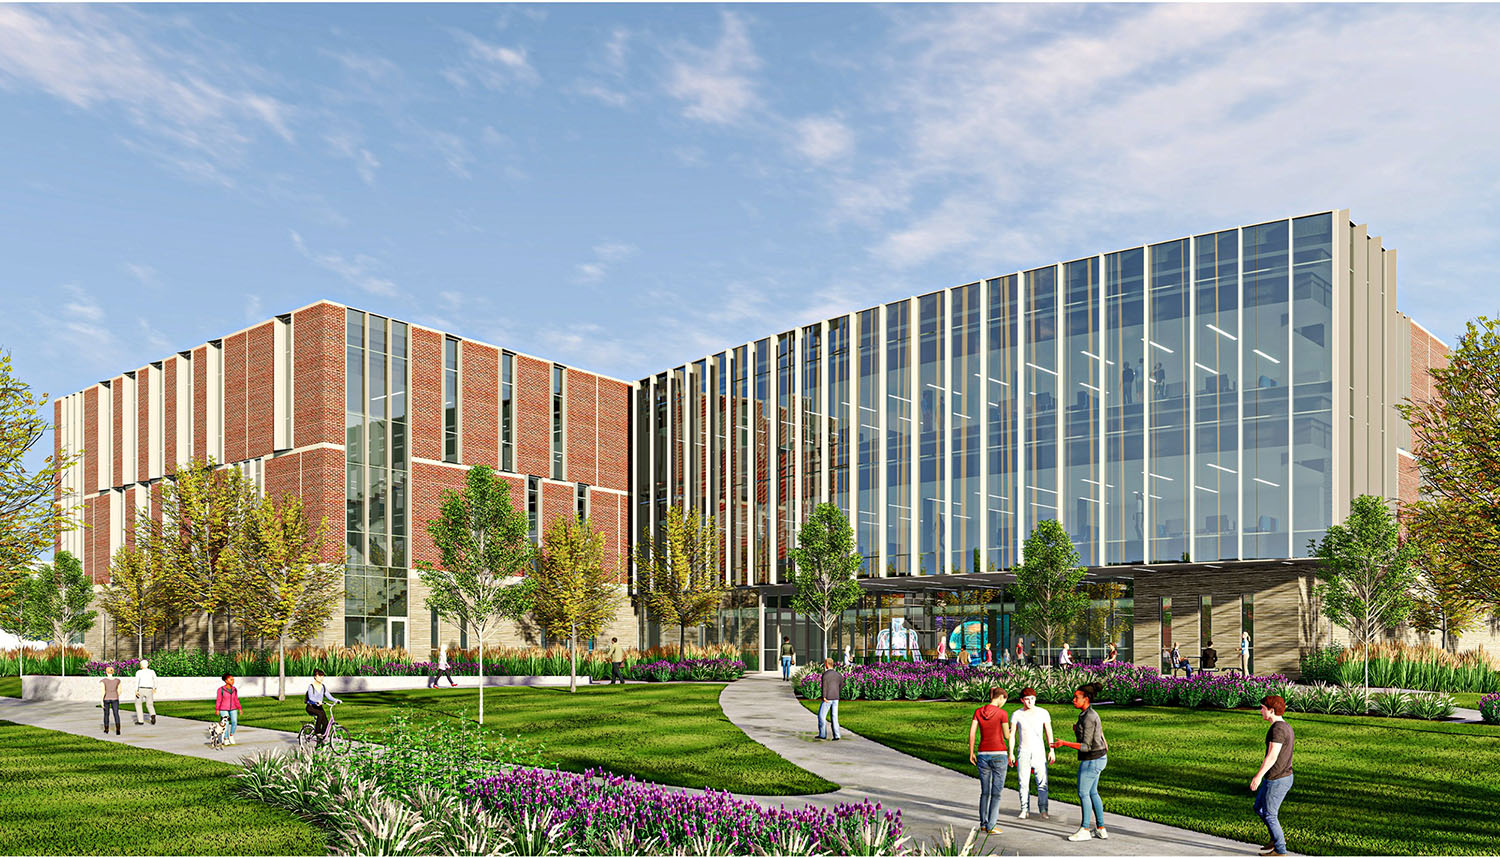 The Rural Health Education Building is targeted for completion in late 2025 with occupancy in early 2026&period;